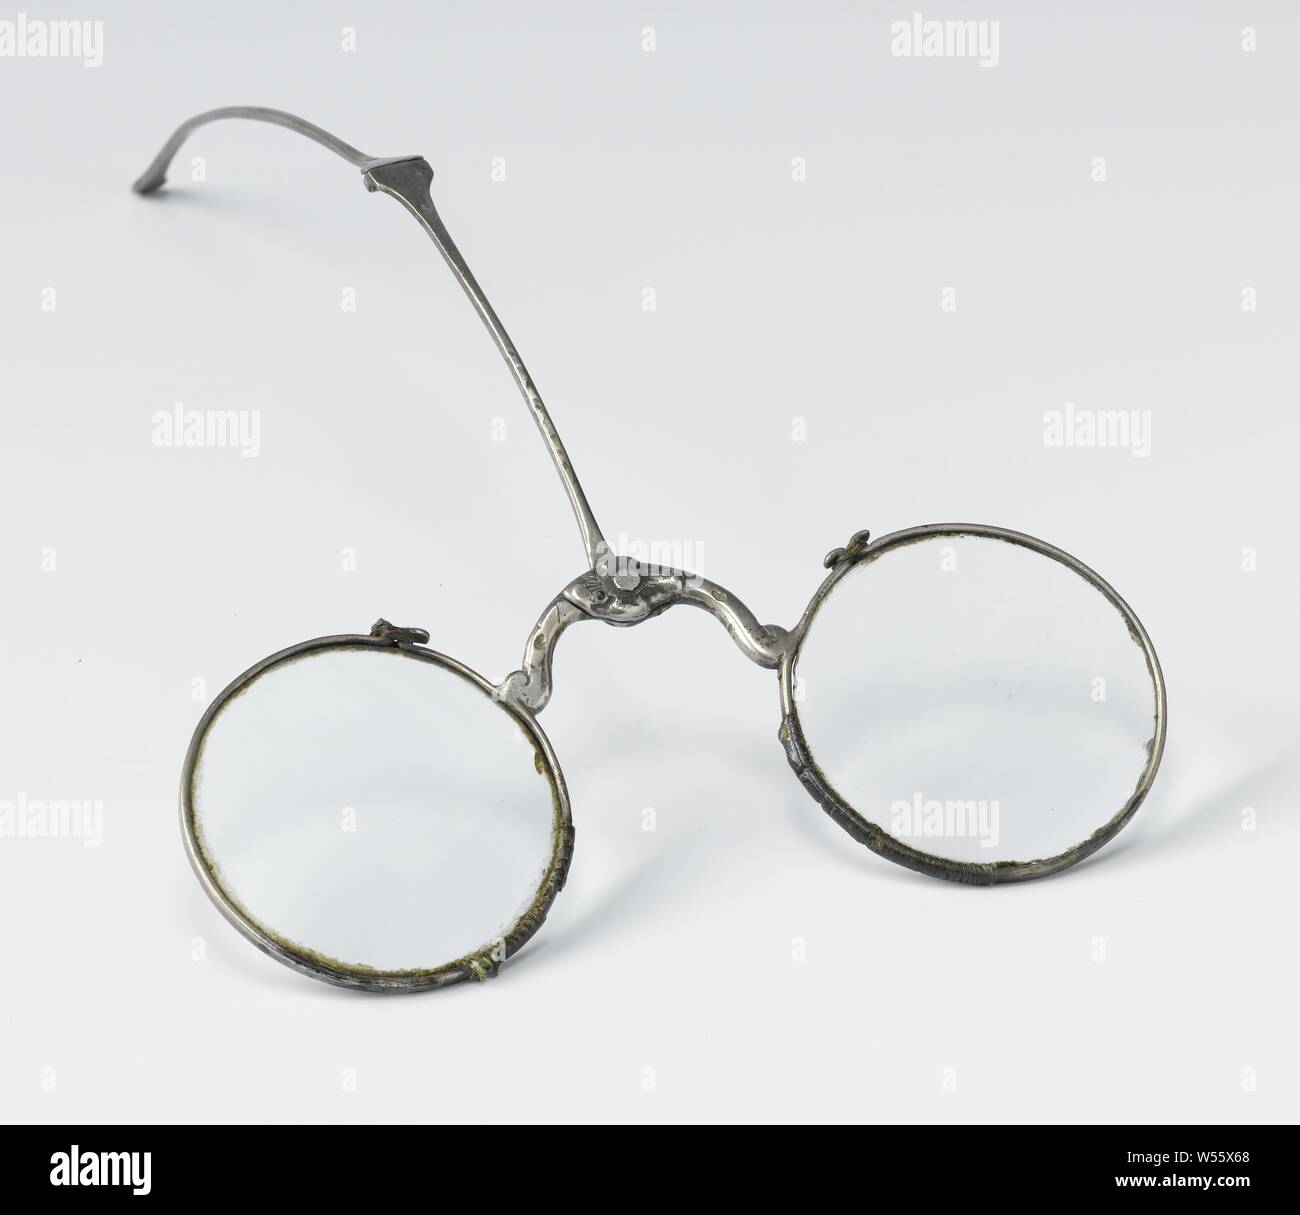 Forehead glasses with silver frame and polished round lenses, Forehead glasses with silver frame with spoon attached to the bridge between the lenses and ground round lenses. Model: In the middle of the arch-shaped bridge, ending in a curl on the rim around the glass, a pin is attached that fixes the spoon to the glasses. The spoon has a hinge halfway. The edges around the glasses are open at the top and bent back so that they form a hook with a metal wire around it for closing., anonymous, Netherlands (possibly), c. 1675 - c. 1775, montuur, glazen, grinding, l 9 cm d 3.5 cm Stock Photo